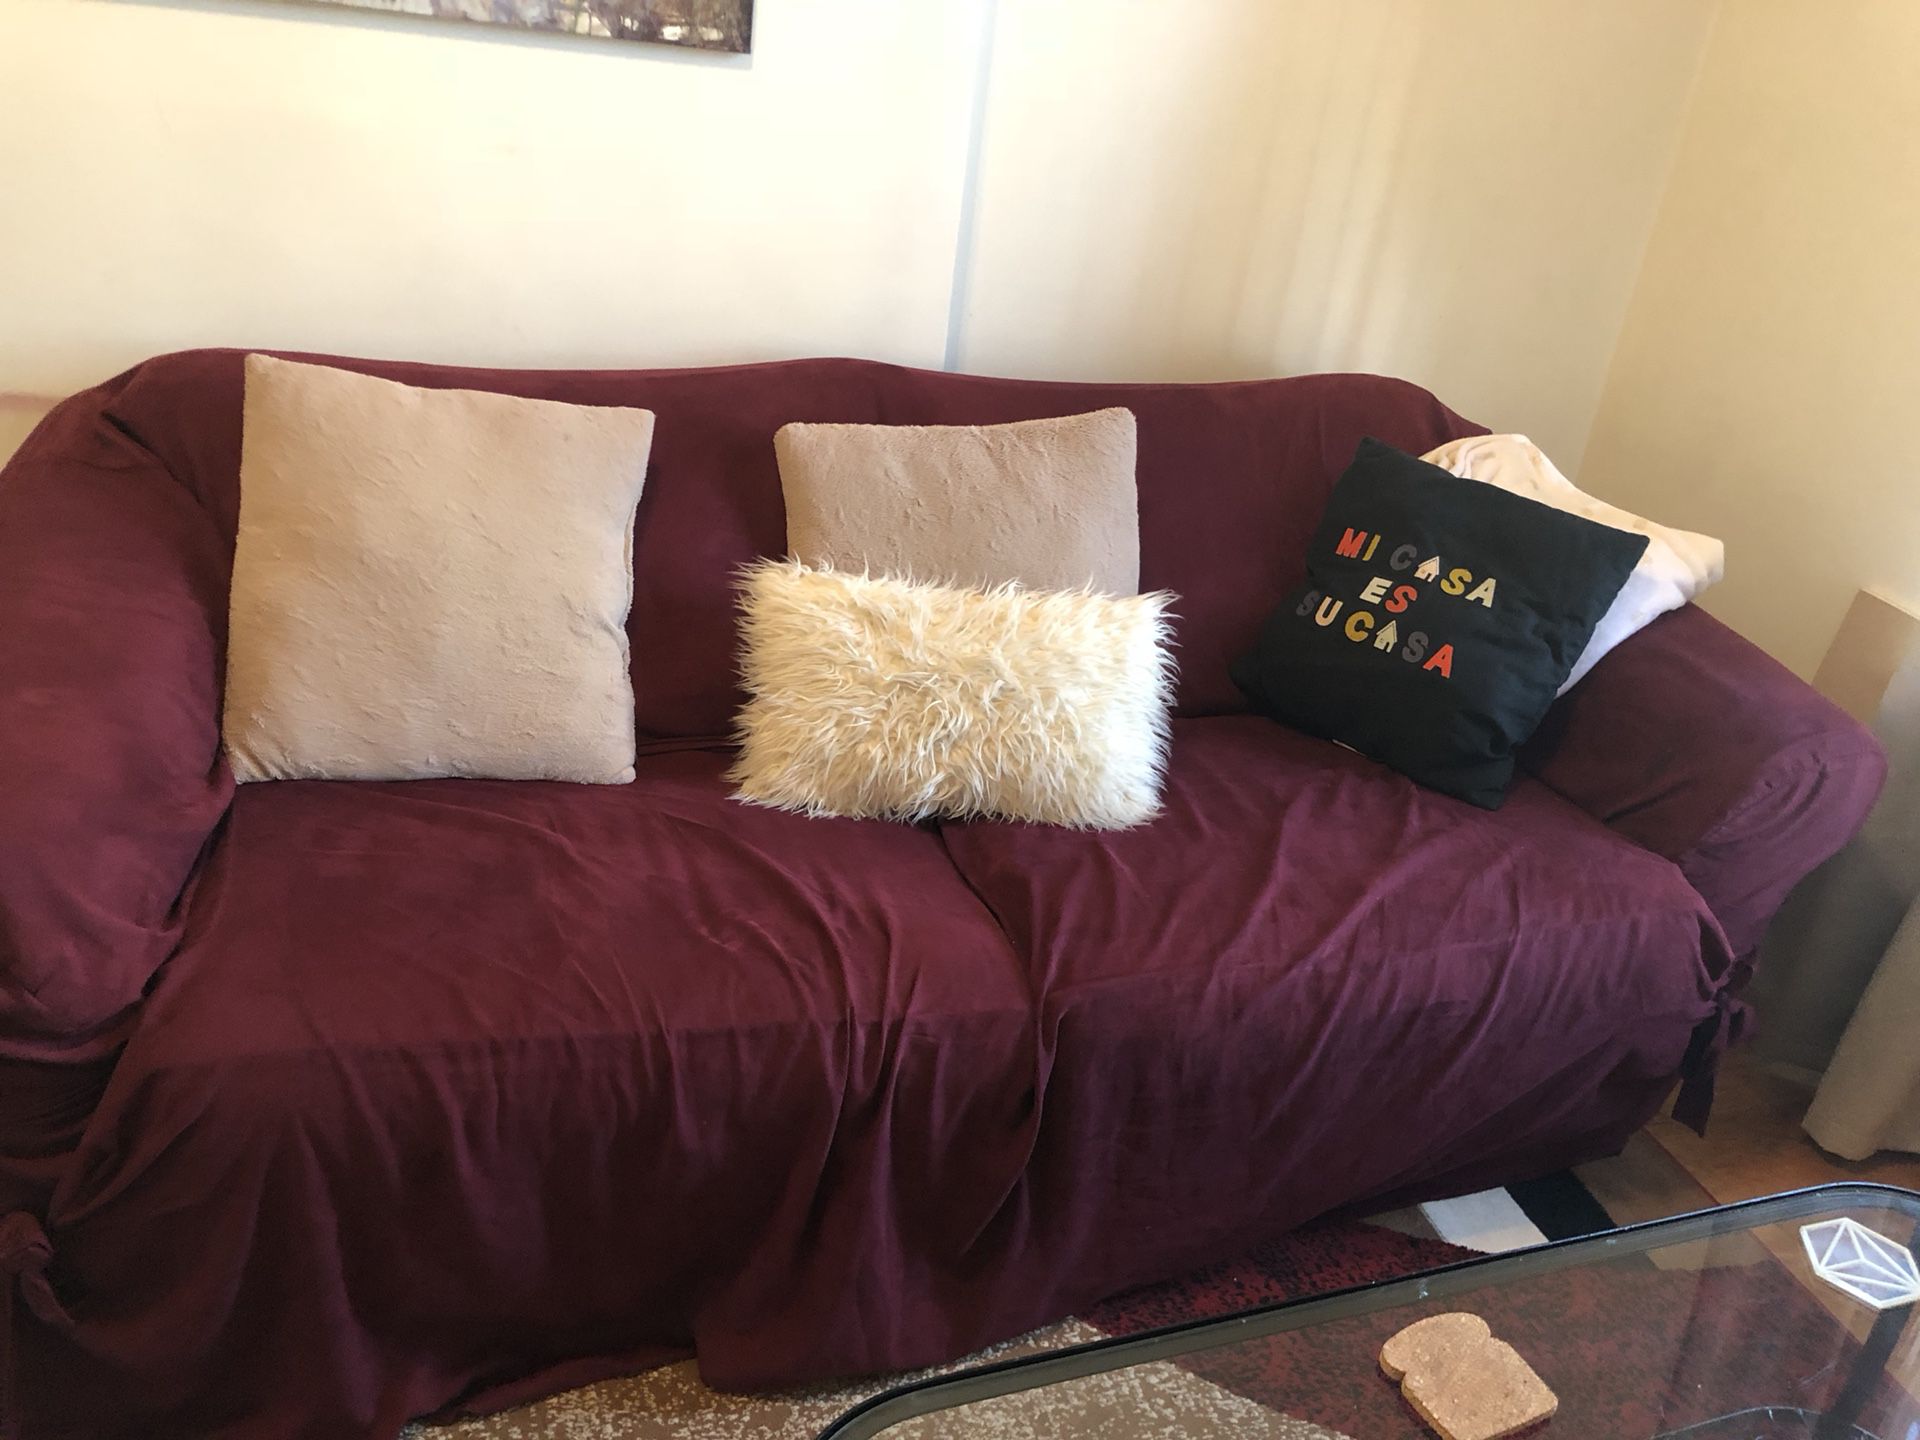 Cheap furniture and decor items looking for a new home . These items need to be picked up from the location .